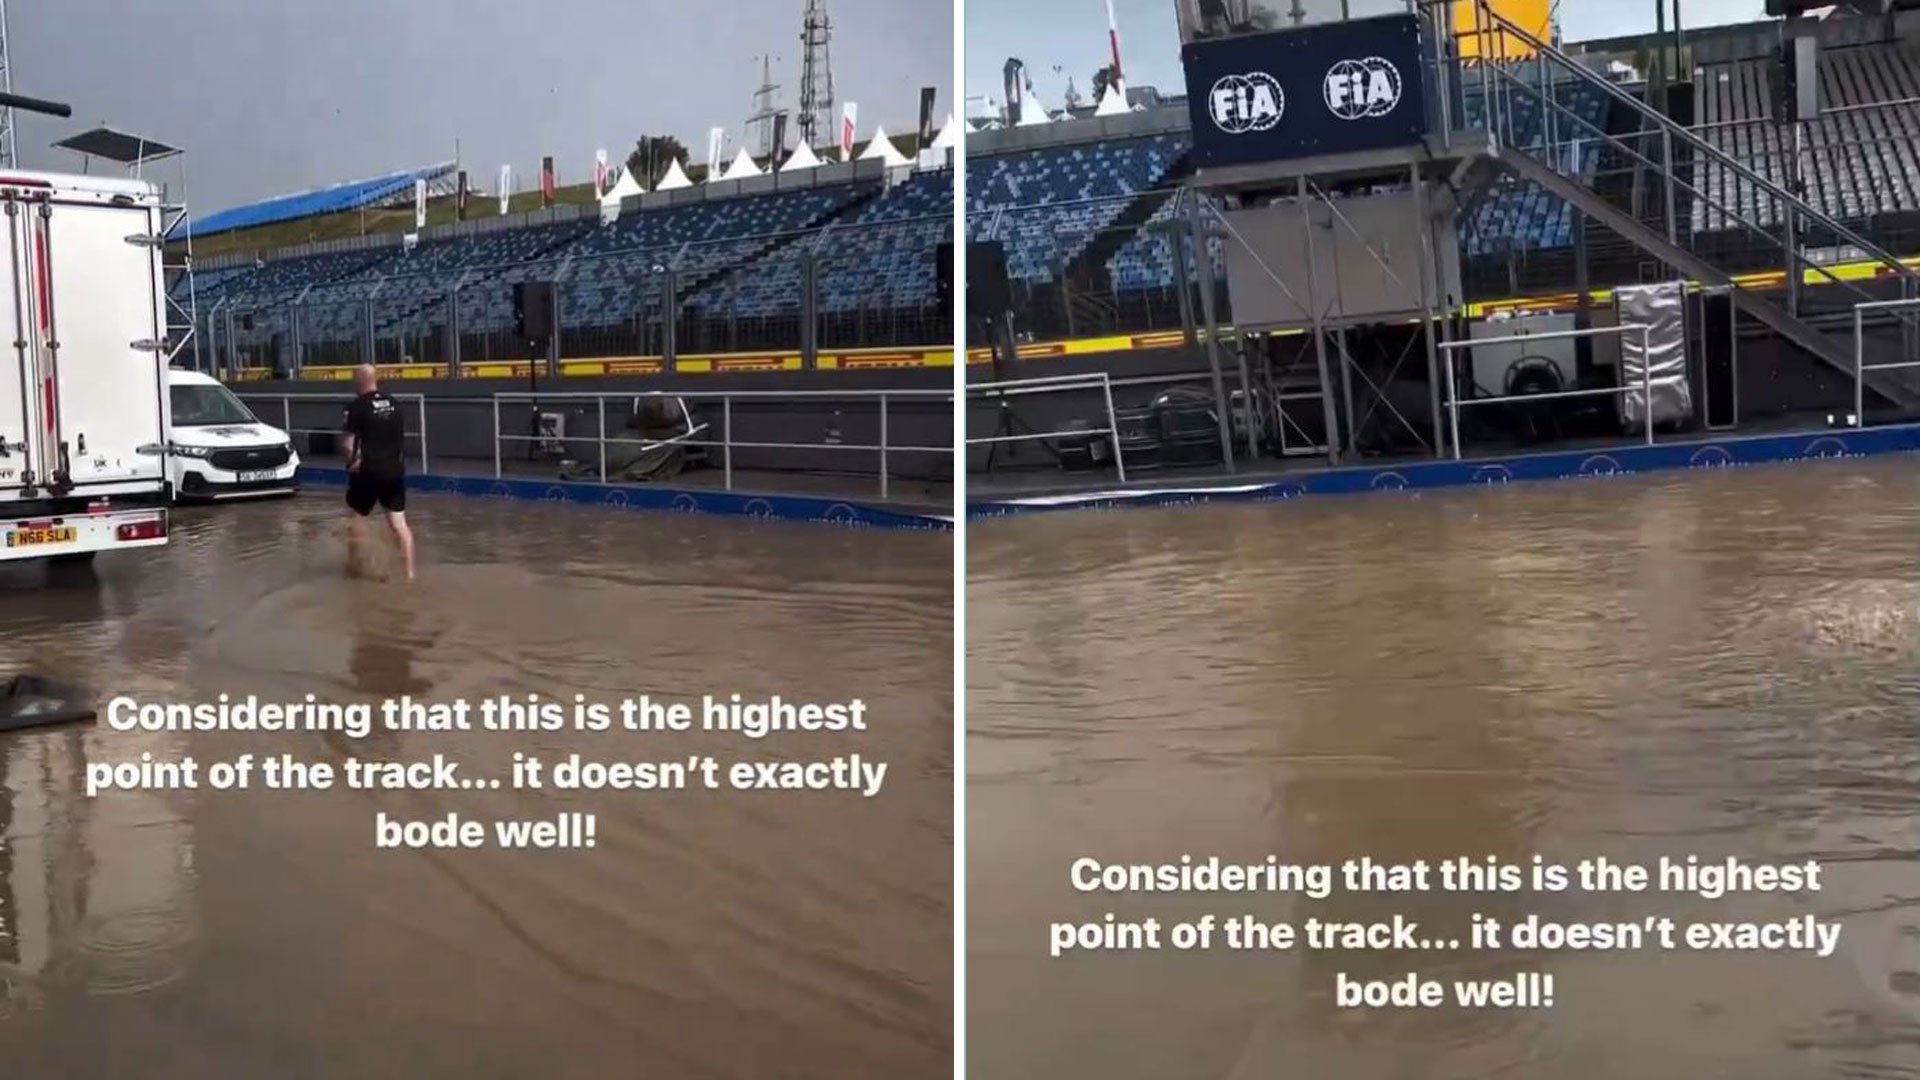 Hungarian Grand Prix fears as pit lane FLOODED less than 48 hours before first qualifying session